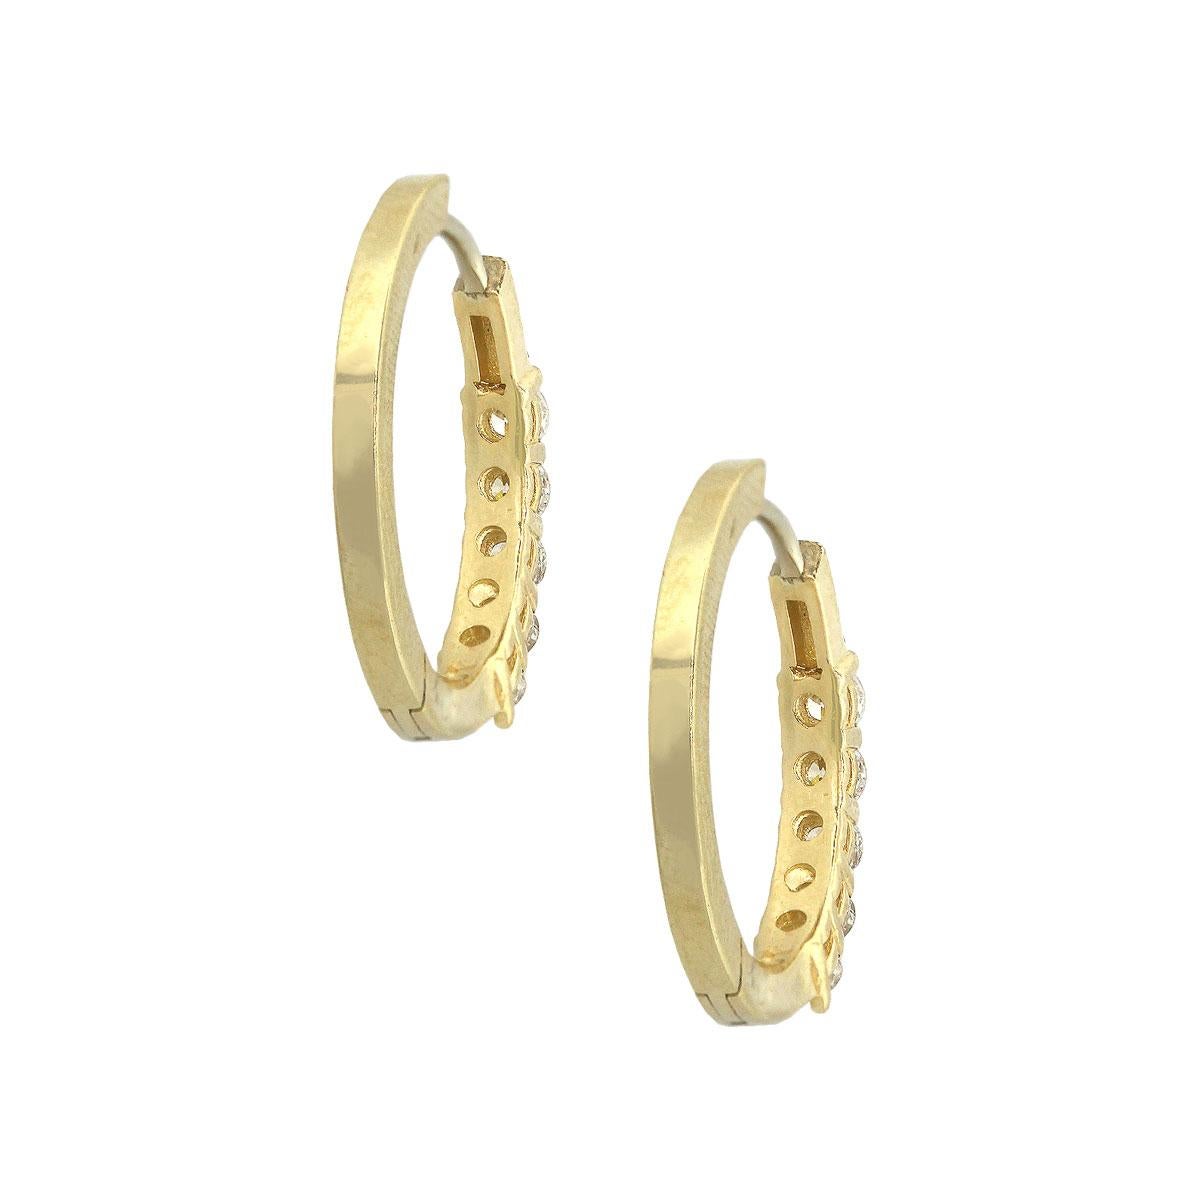 Material: 14k Yellow Gold
Diamond Details: Approx. 1.07ctw of round brilliant diamonds. Diamonds are G/H in color and SI in clarity
Measurements: 0.80″ x 0.10″ x 0.83″
Earrings Backs: Tension post
Total Weight: 5g (3.2dwt)
SKU: A30312428